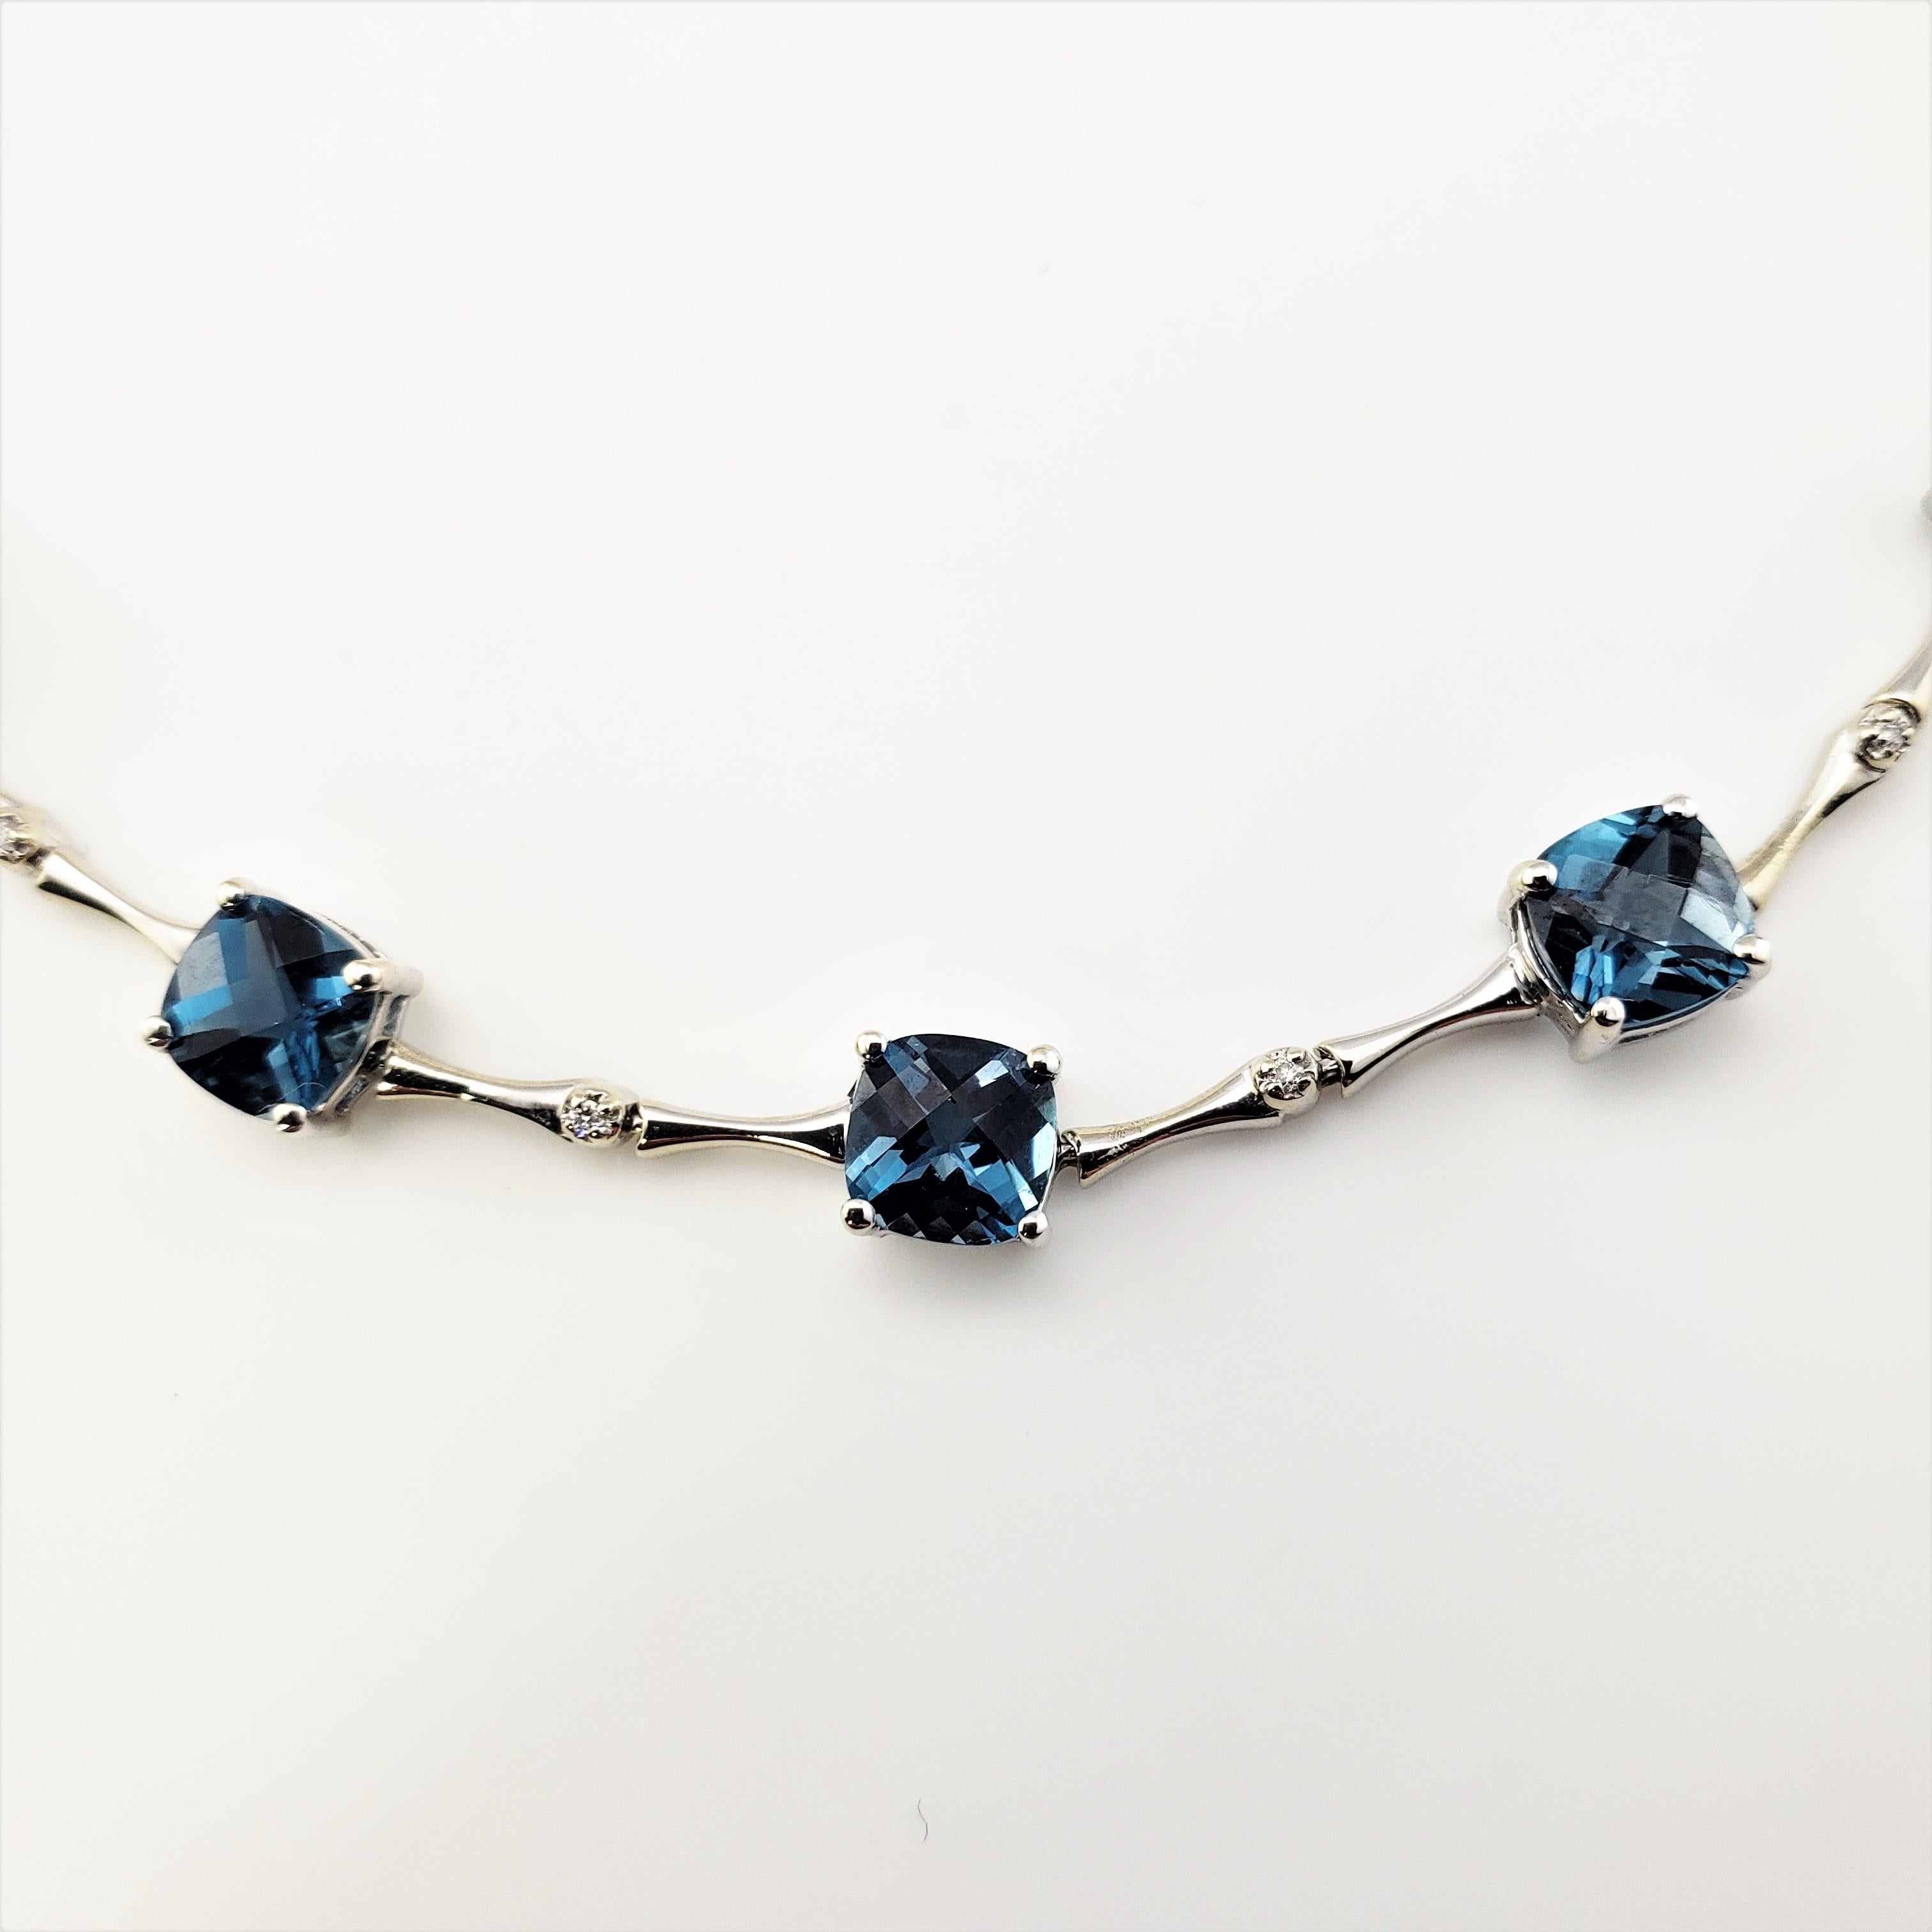 14 Karat White Gold Tourmaline and Diamond Bracelet GAI Certified-

This lovely bracelet features eight cushion cut blue tourmalines (6 mm x 6 mm) and eight round brilliant cut diamonds set in beautifully detailed 14K white gold.

Tourmaline total